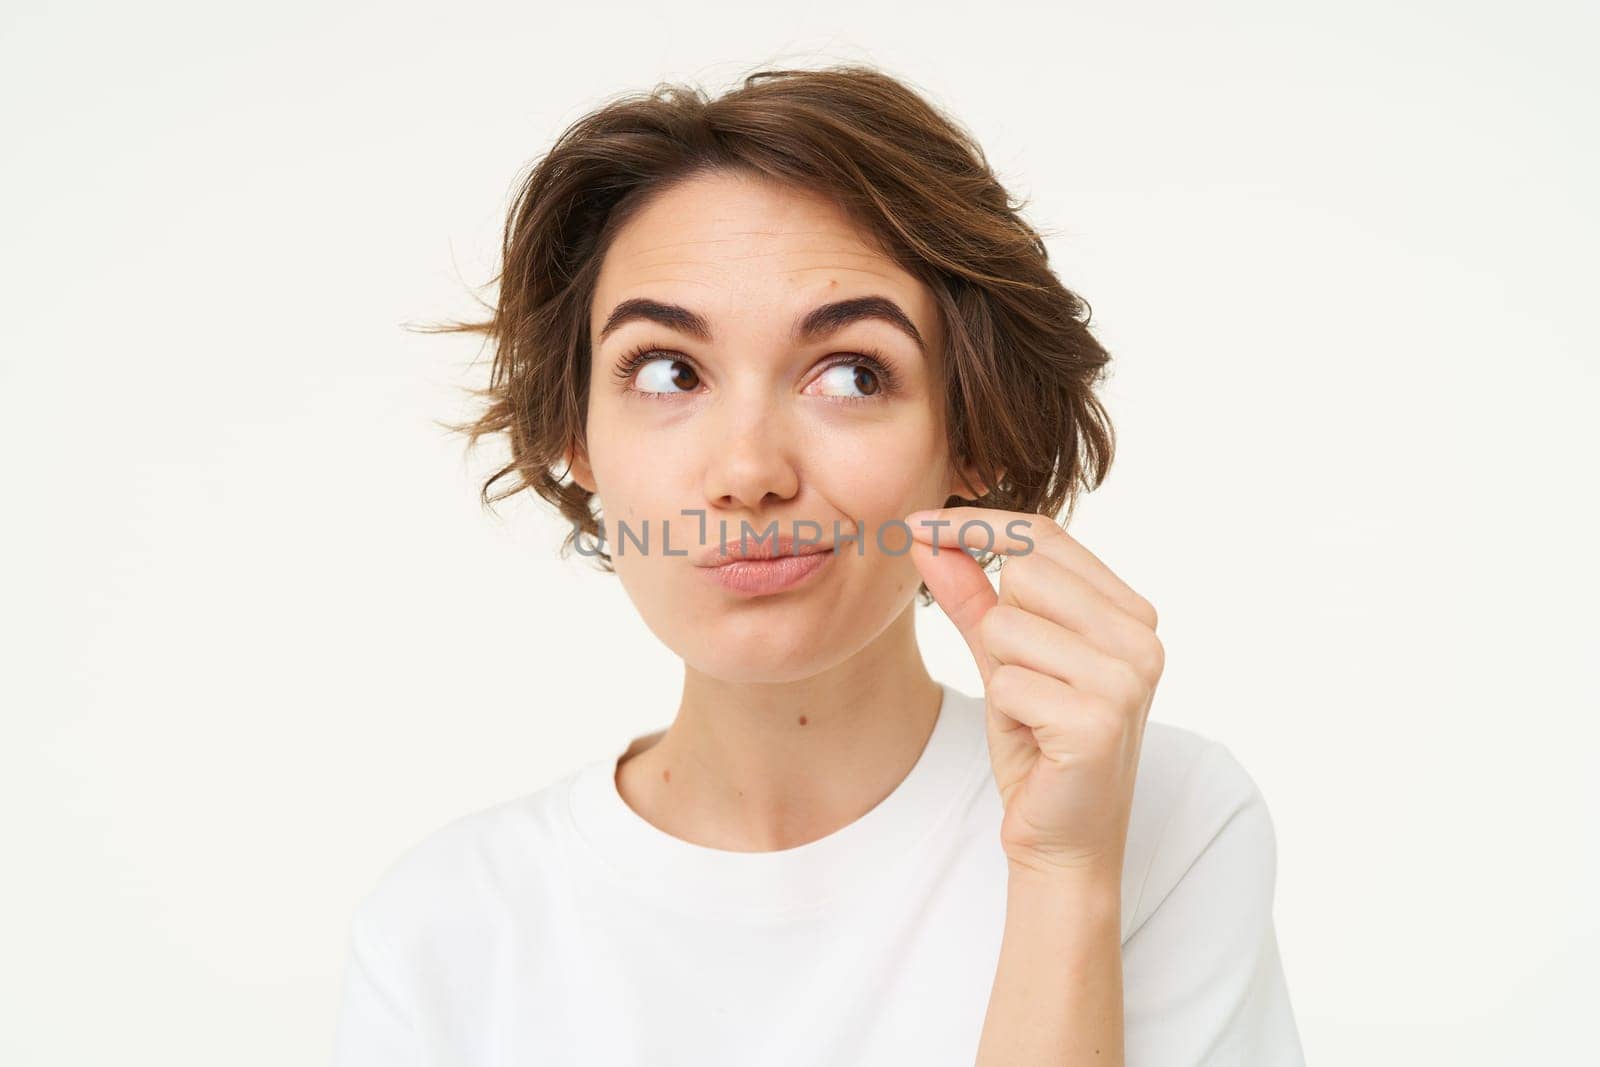 Image of young woman makes promise to keep secret, shows mouth zip gesture, puts a seal on her lips, dont talk sign, stands over white background.